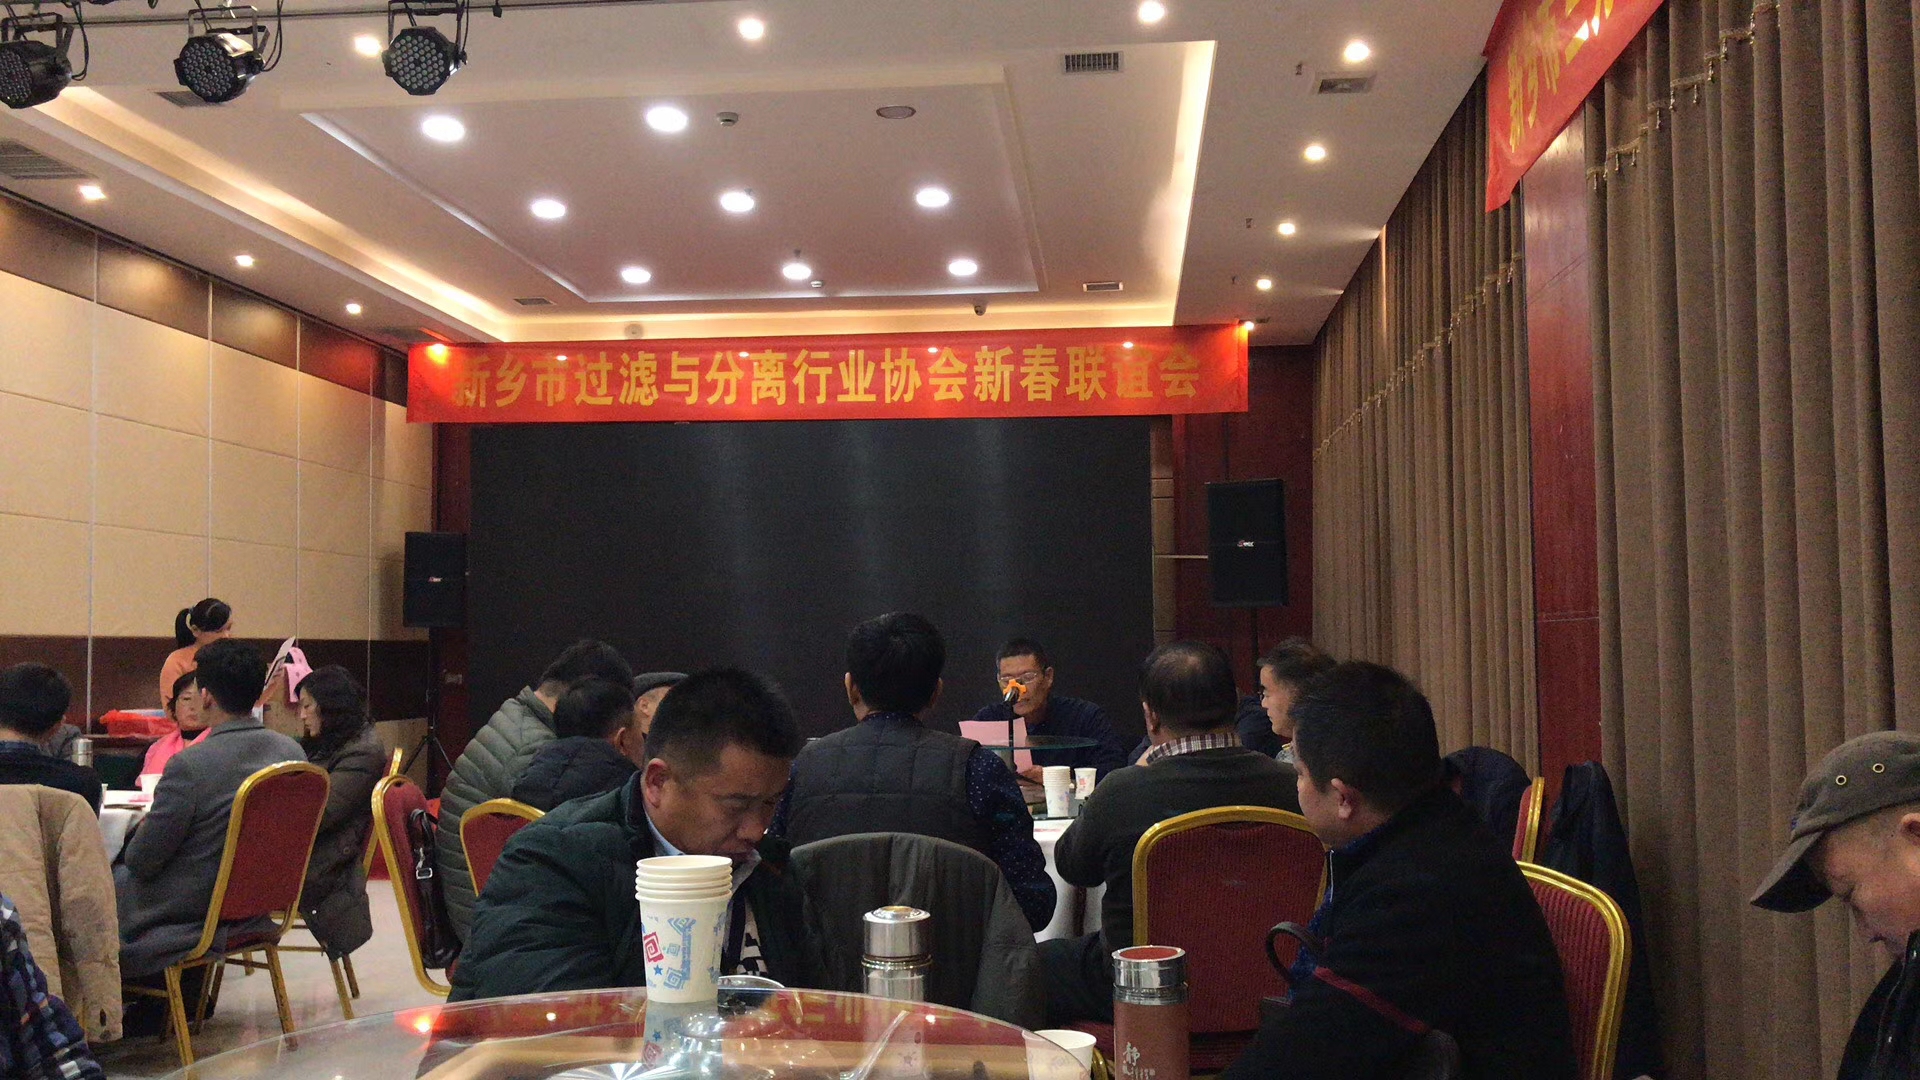 Warm congratulations for successful of annual meeting of  Xinxiang  Filtration and Separation Association!